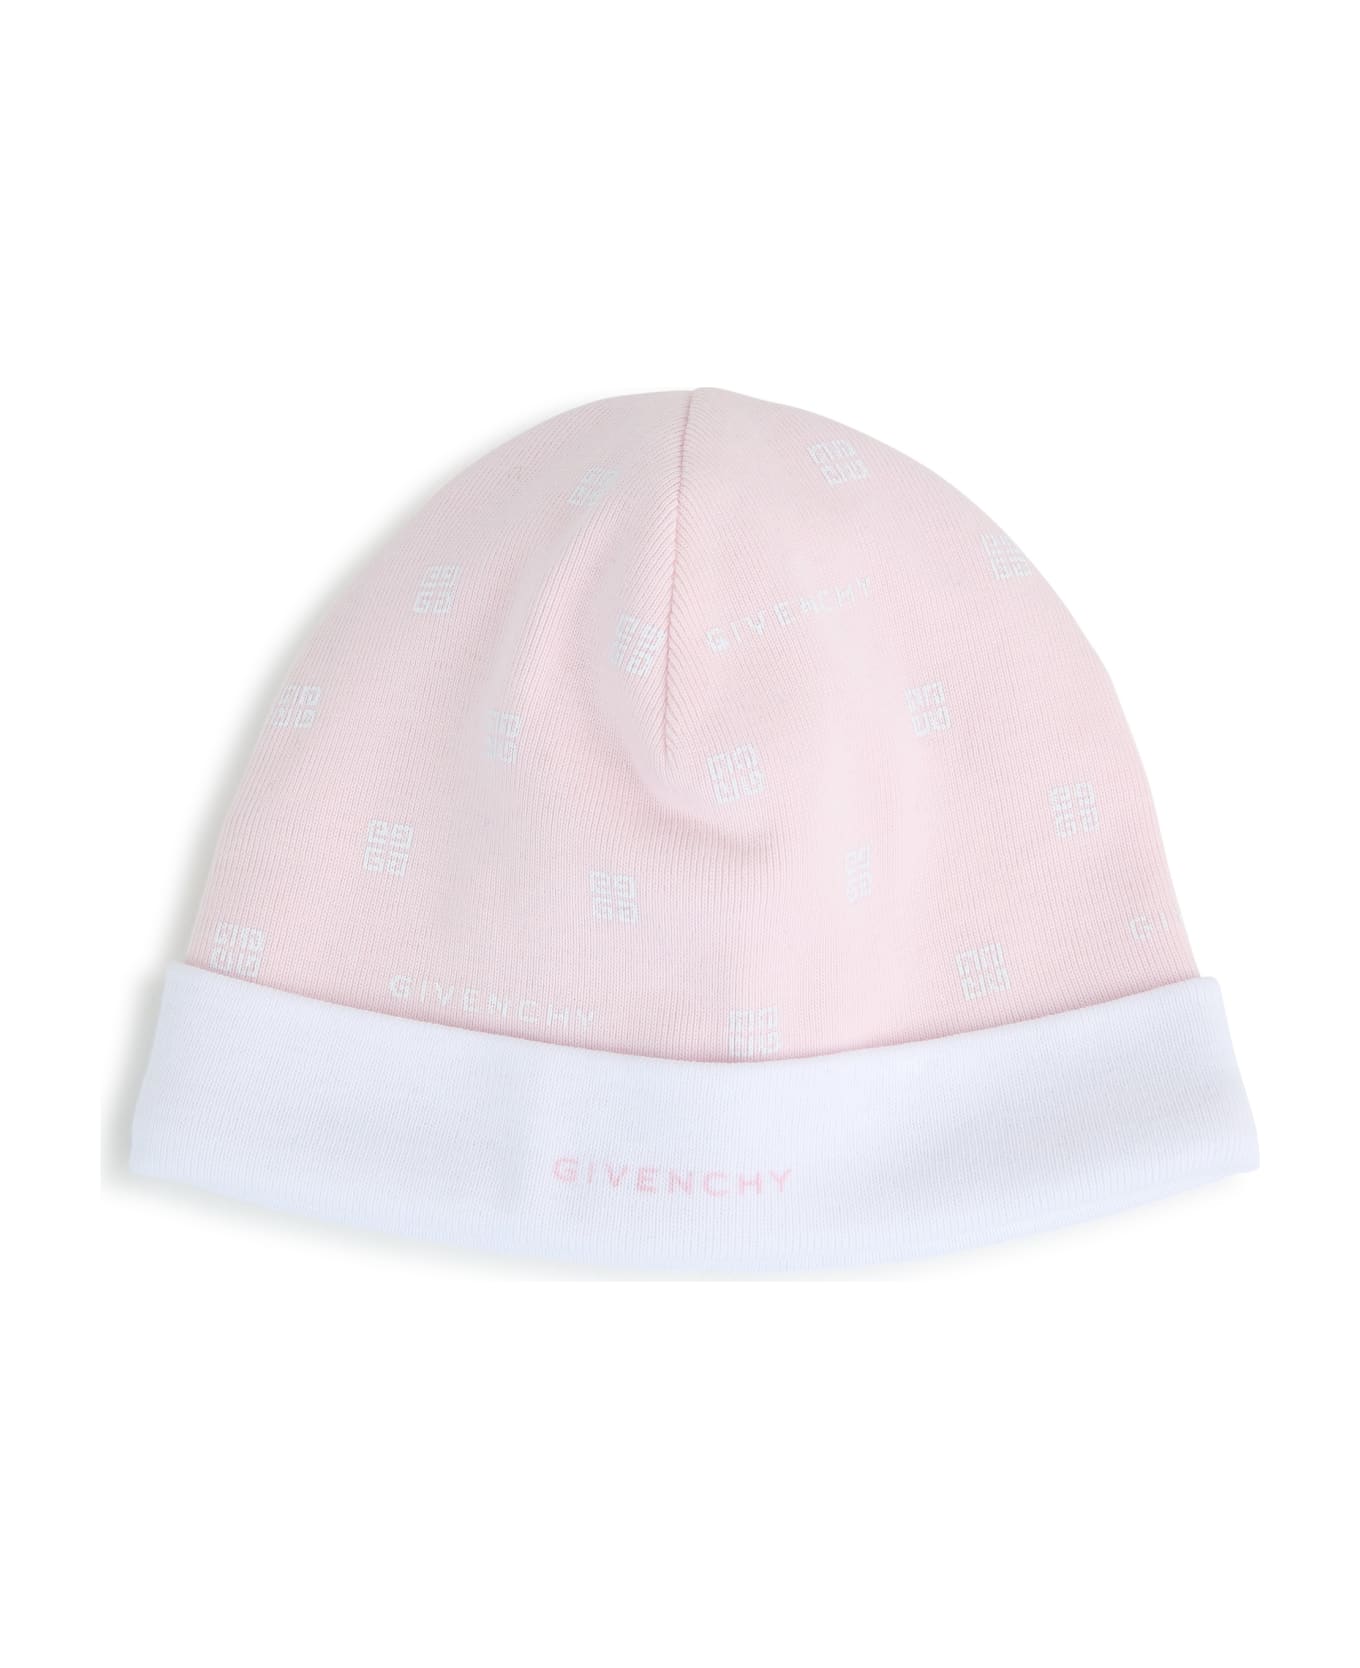 Givenchy Set Of Two Caps With 4g Print - Pink